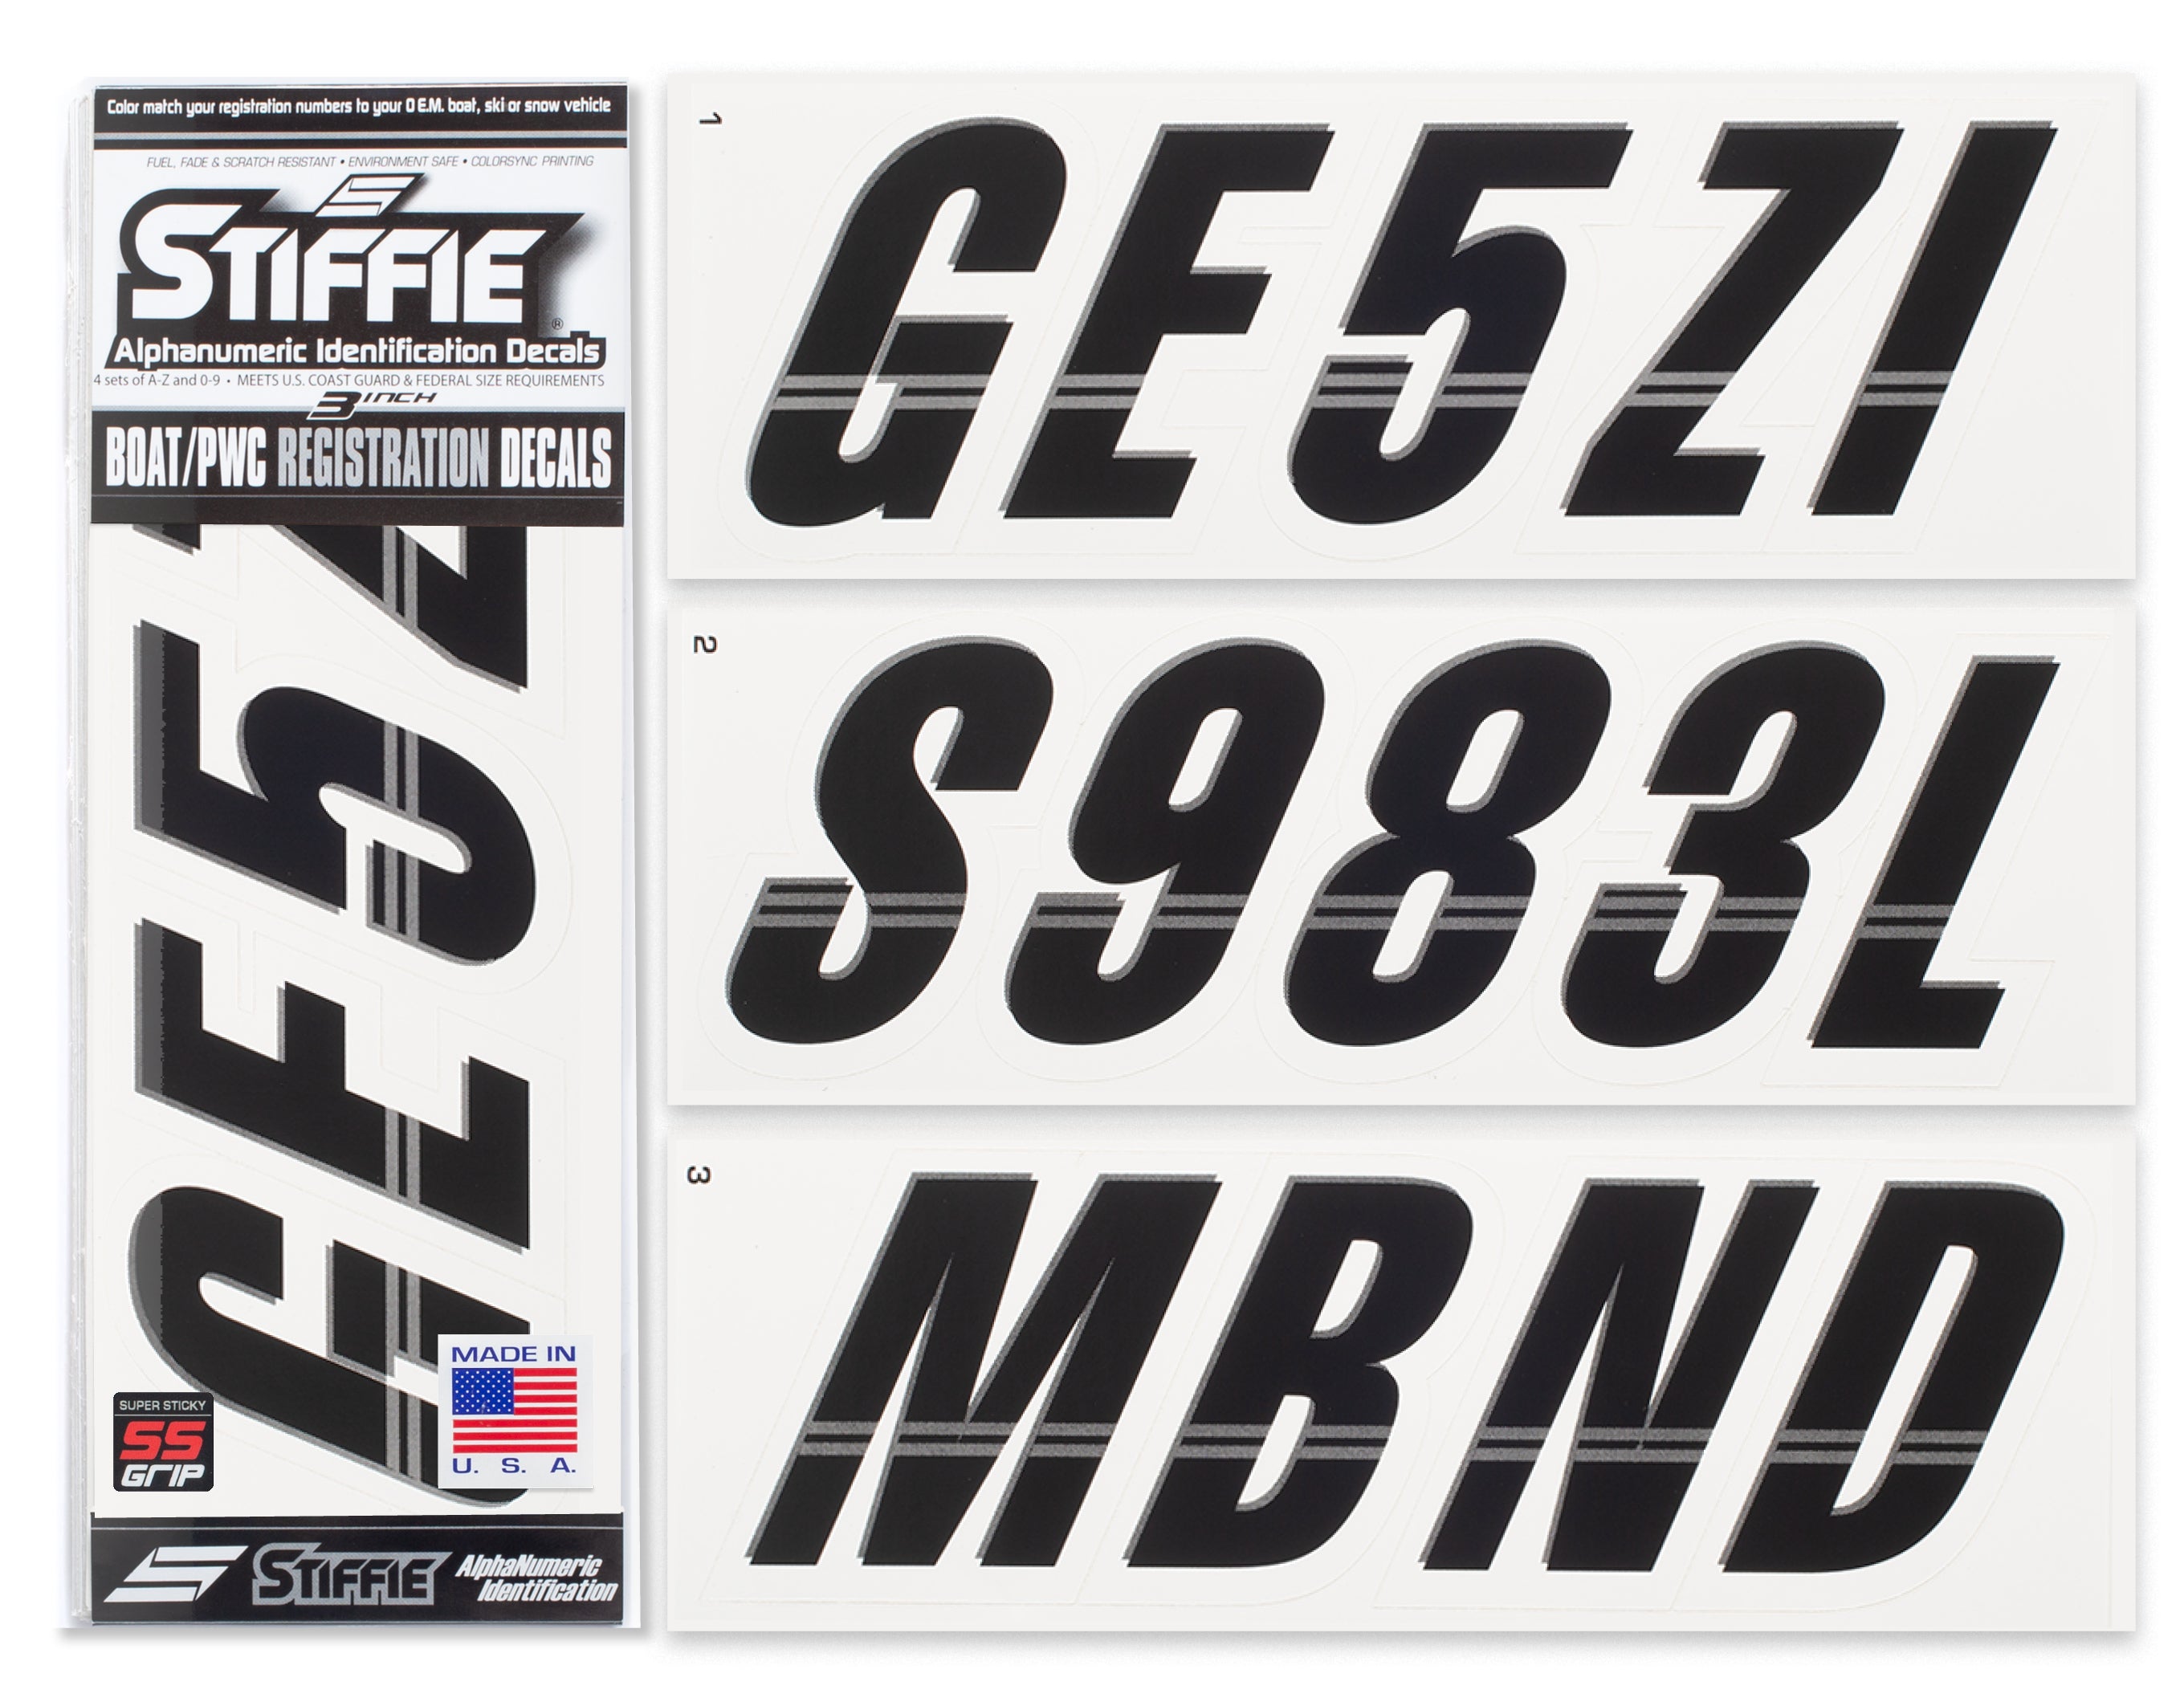 Techtron Black/White Super Sticky 3" Alpha Numeric Registration Identification Numbers Stickers Decals for Sea-Doo Spark, Inflatable Boats, Ribs, Hypalon/PVC, PWC and Boats.